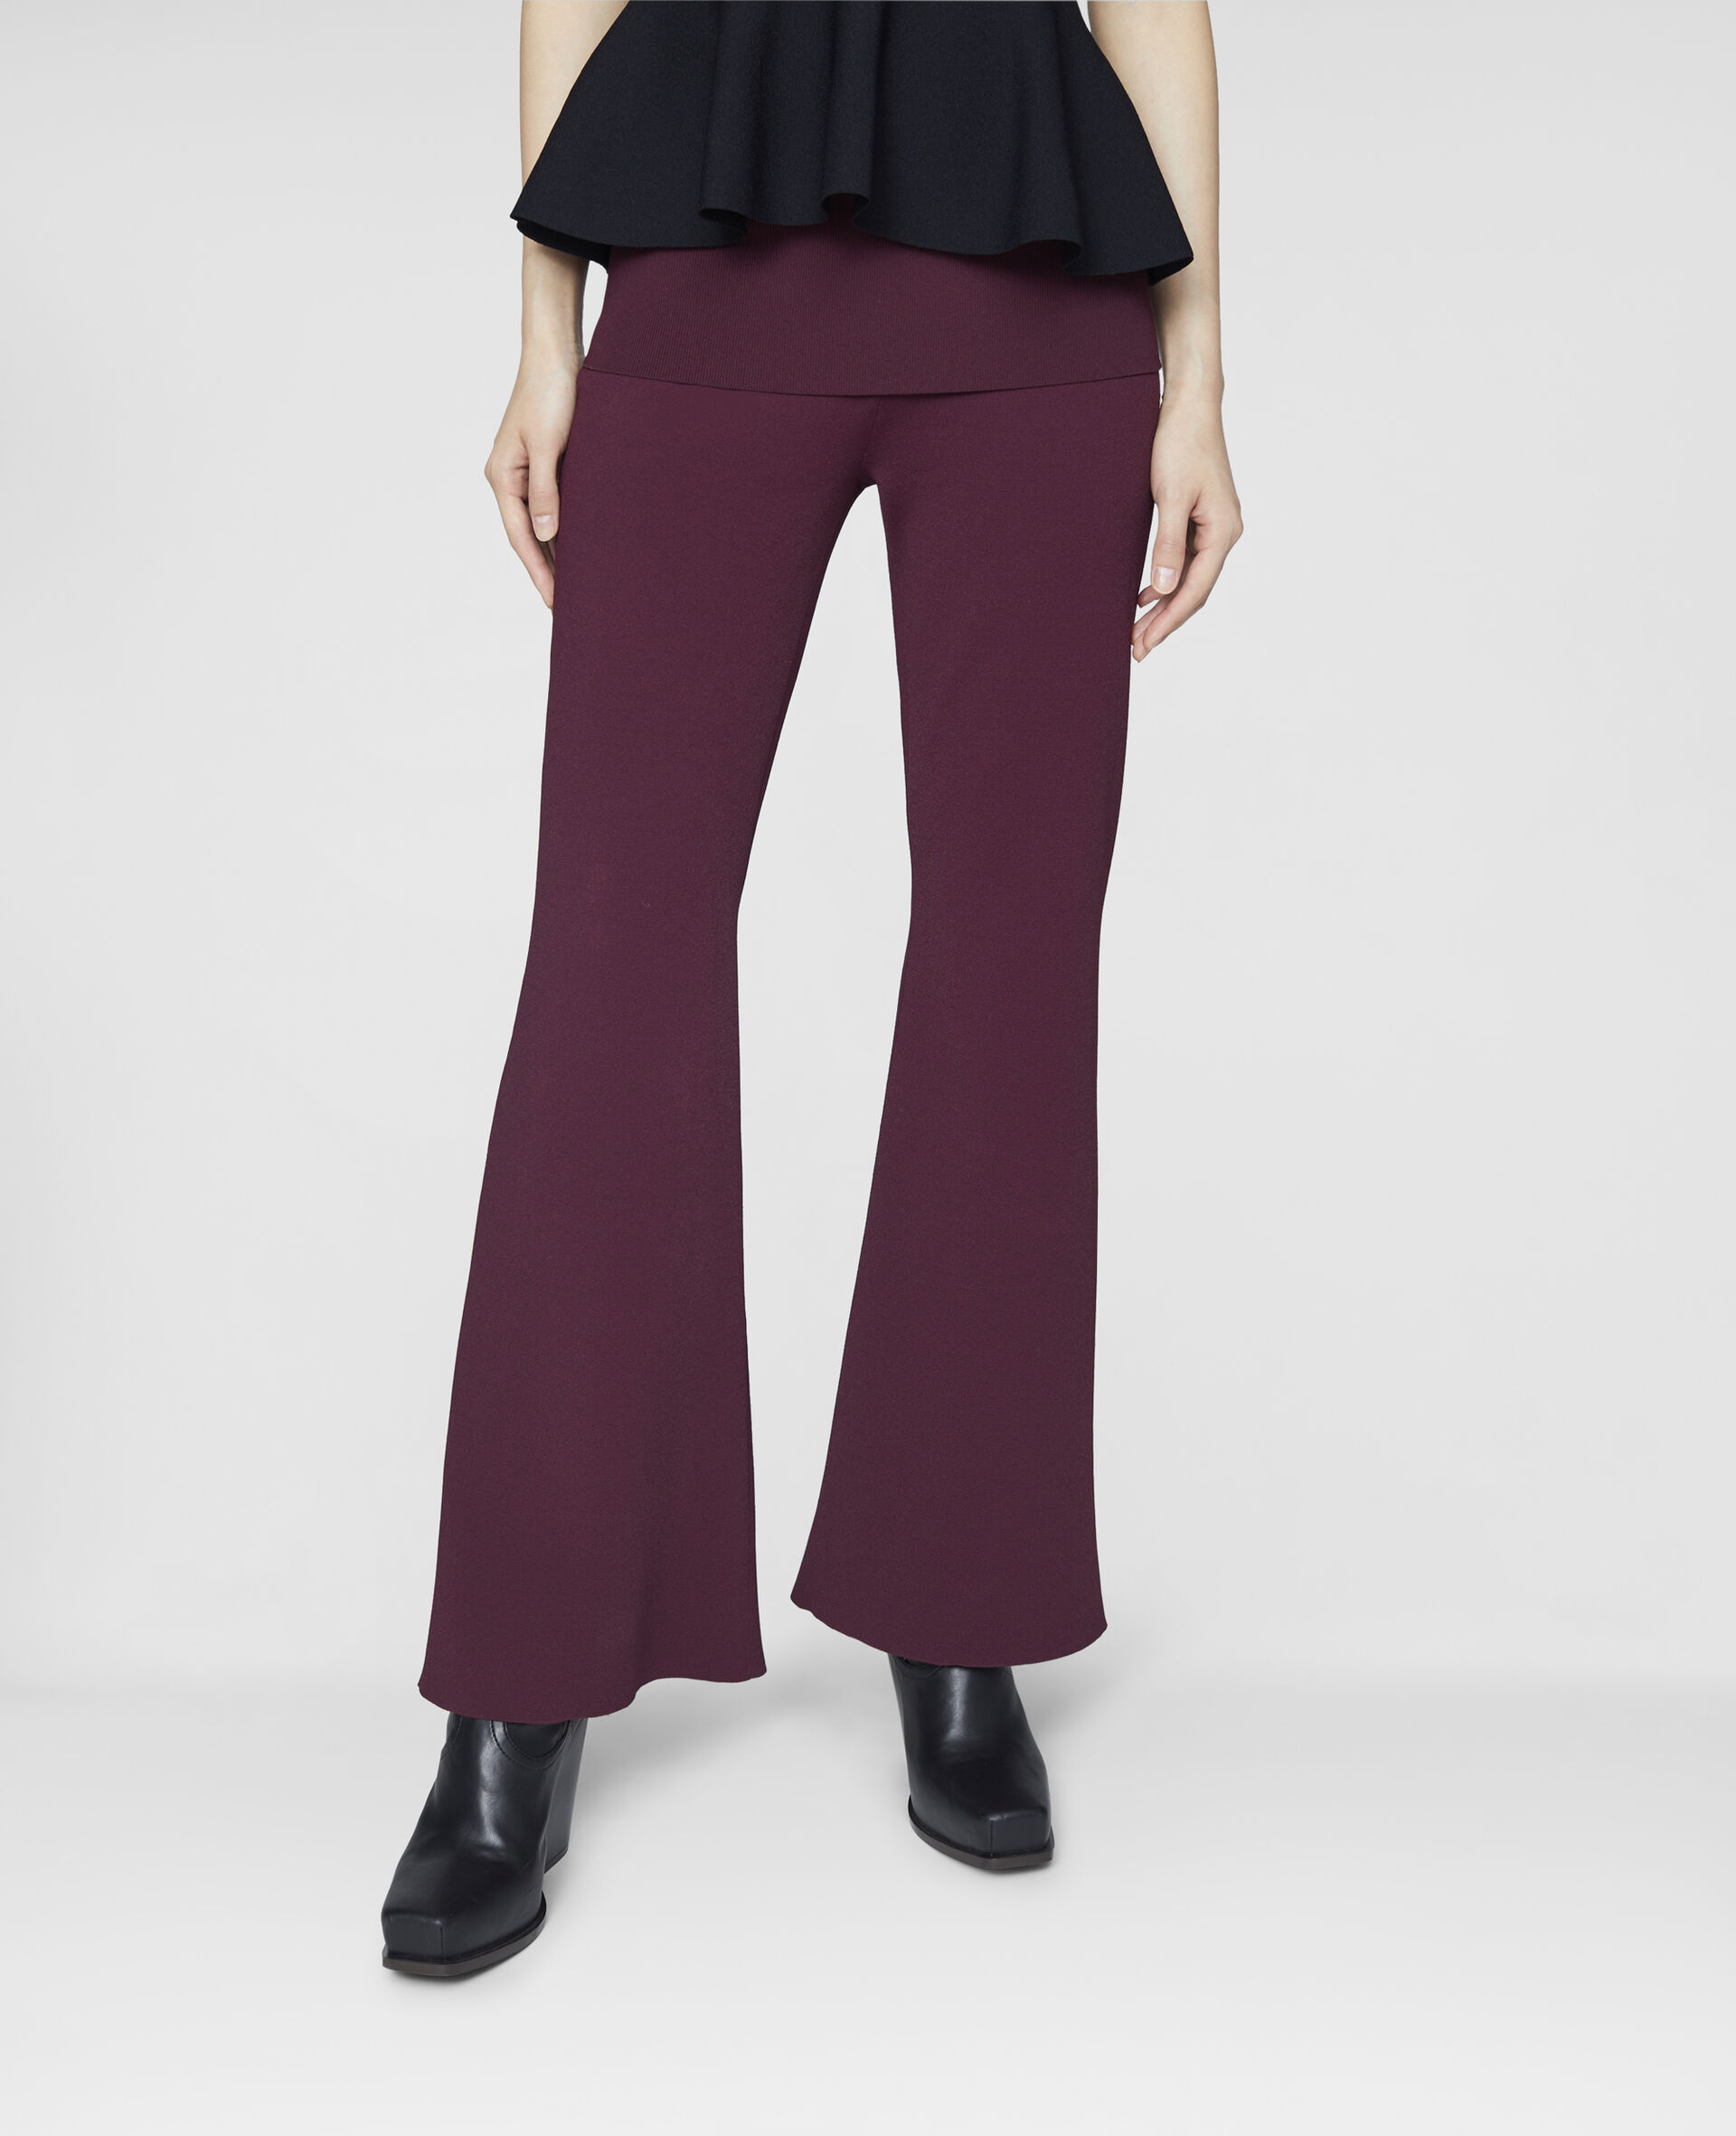 Compact Knit Trousers-Red-large image number 3